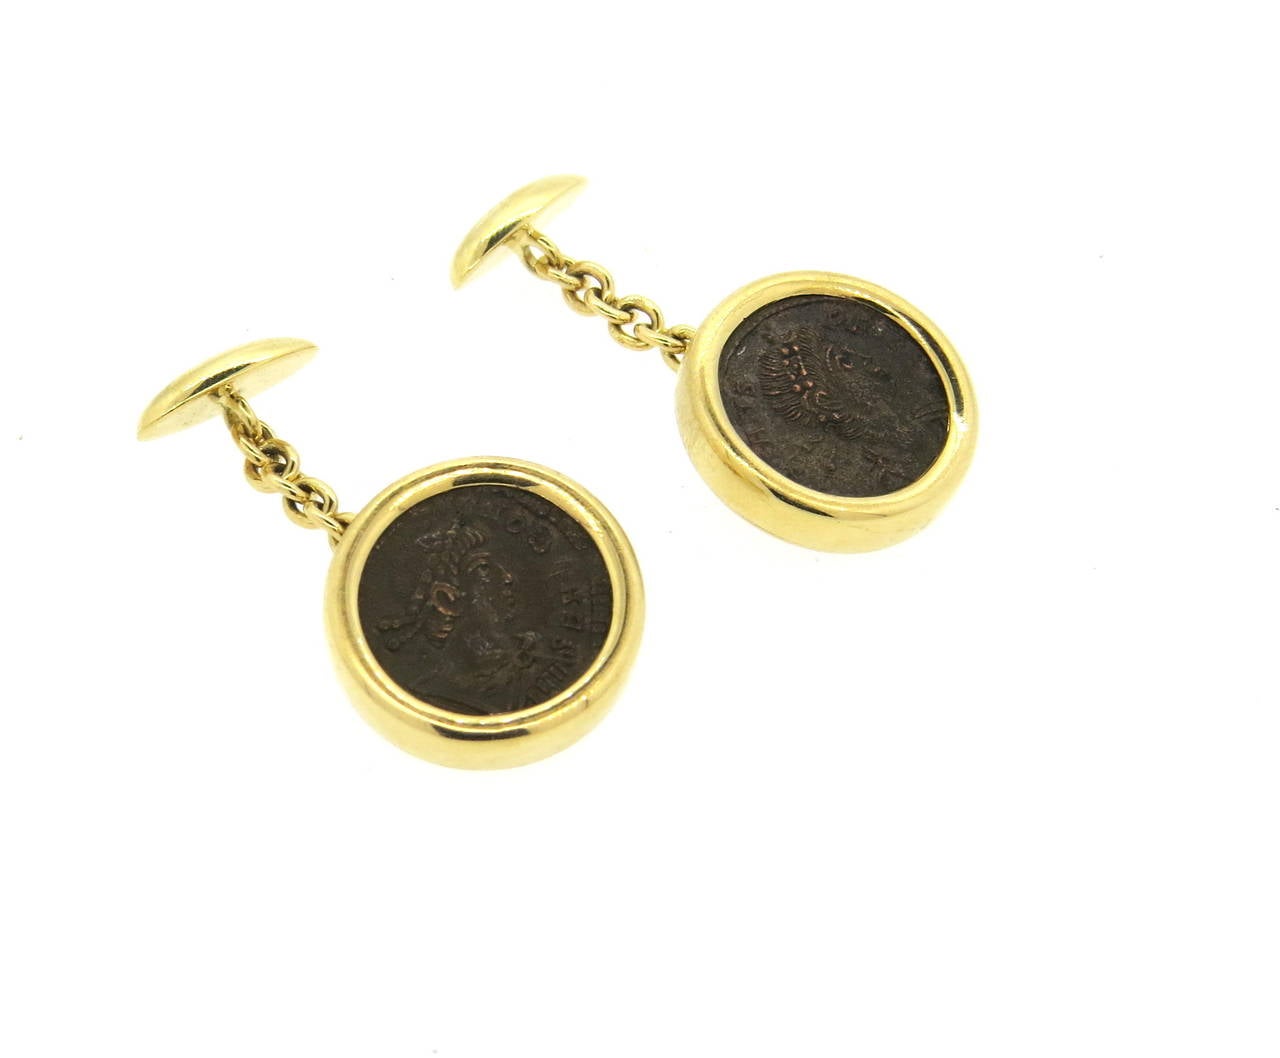 A pair of 18k yellow gold cufflinks, crafted by Bulgari for Monete collection, set with ancient coins in the center. Top of the cufflink measures 18mm in diameter. Marked Bvlgari, 750, Roma-Constantins I Avg A.D. 337-350. Weight - 19.1 grams